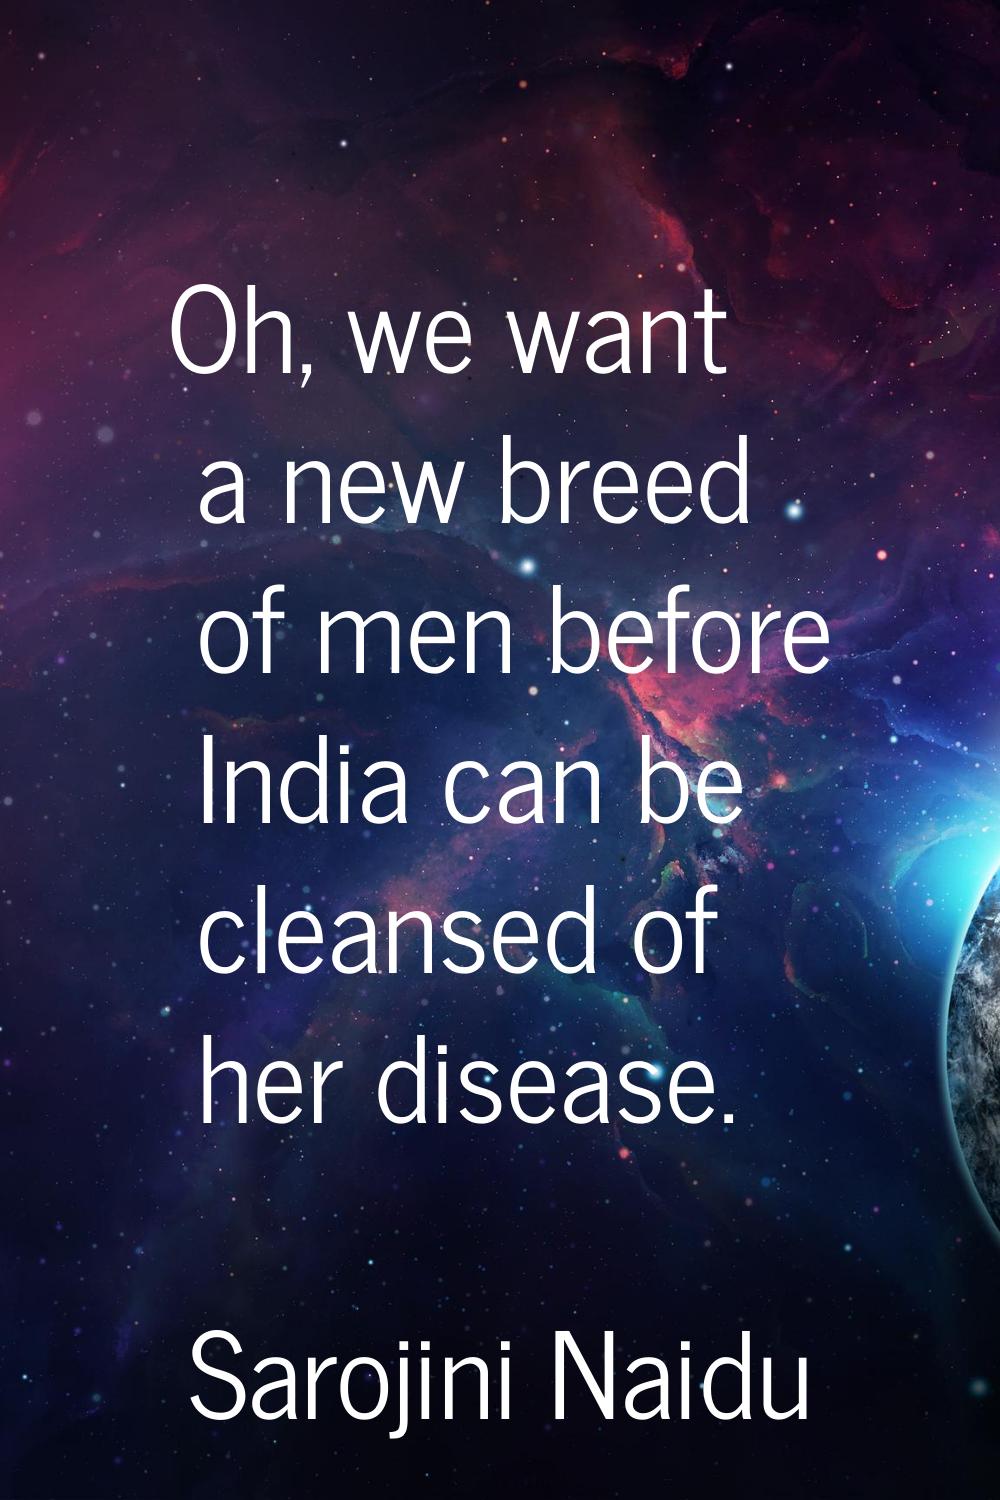 Oh, we want a new breed of men before India can be cleansed of her disease.